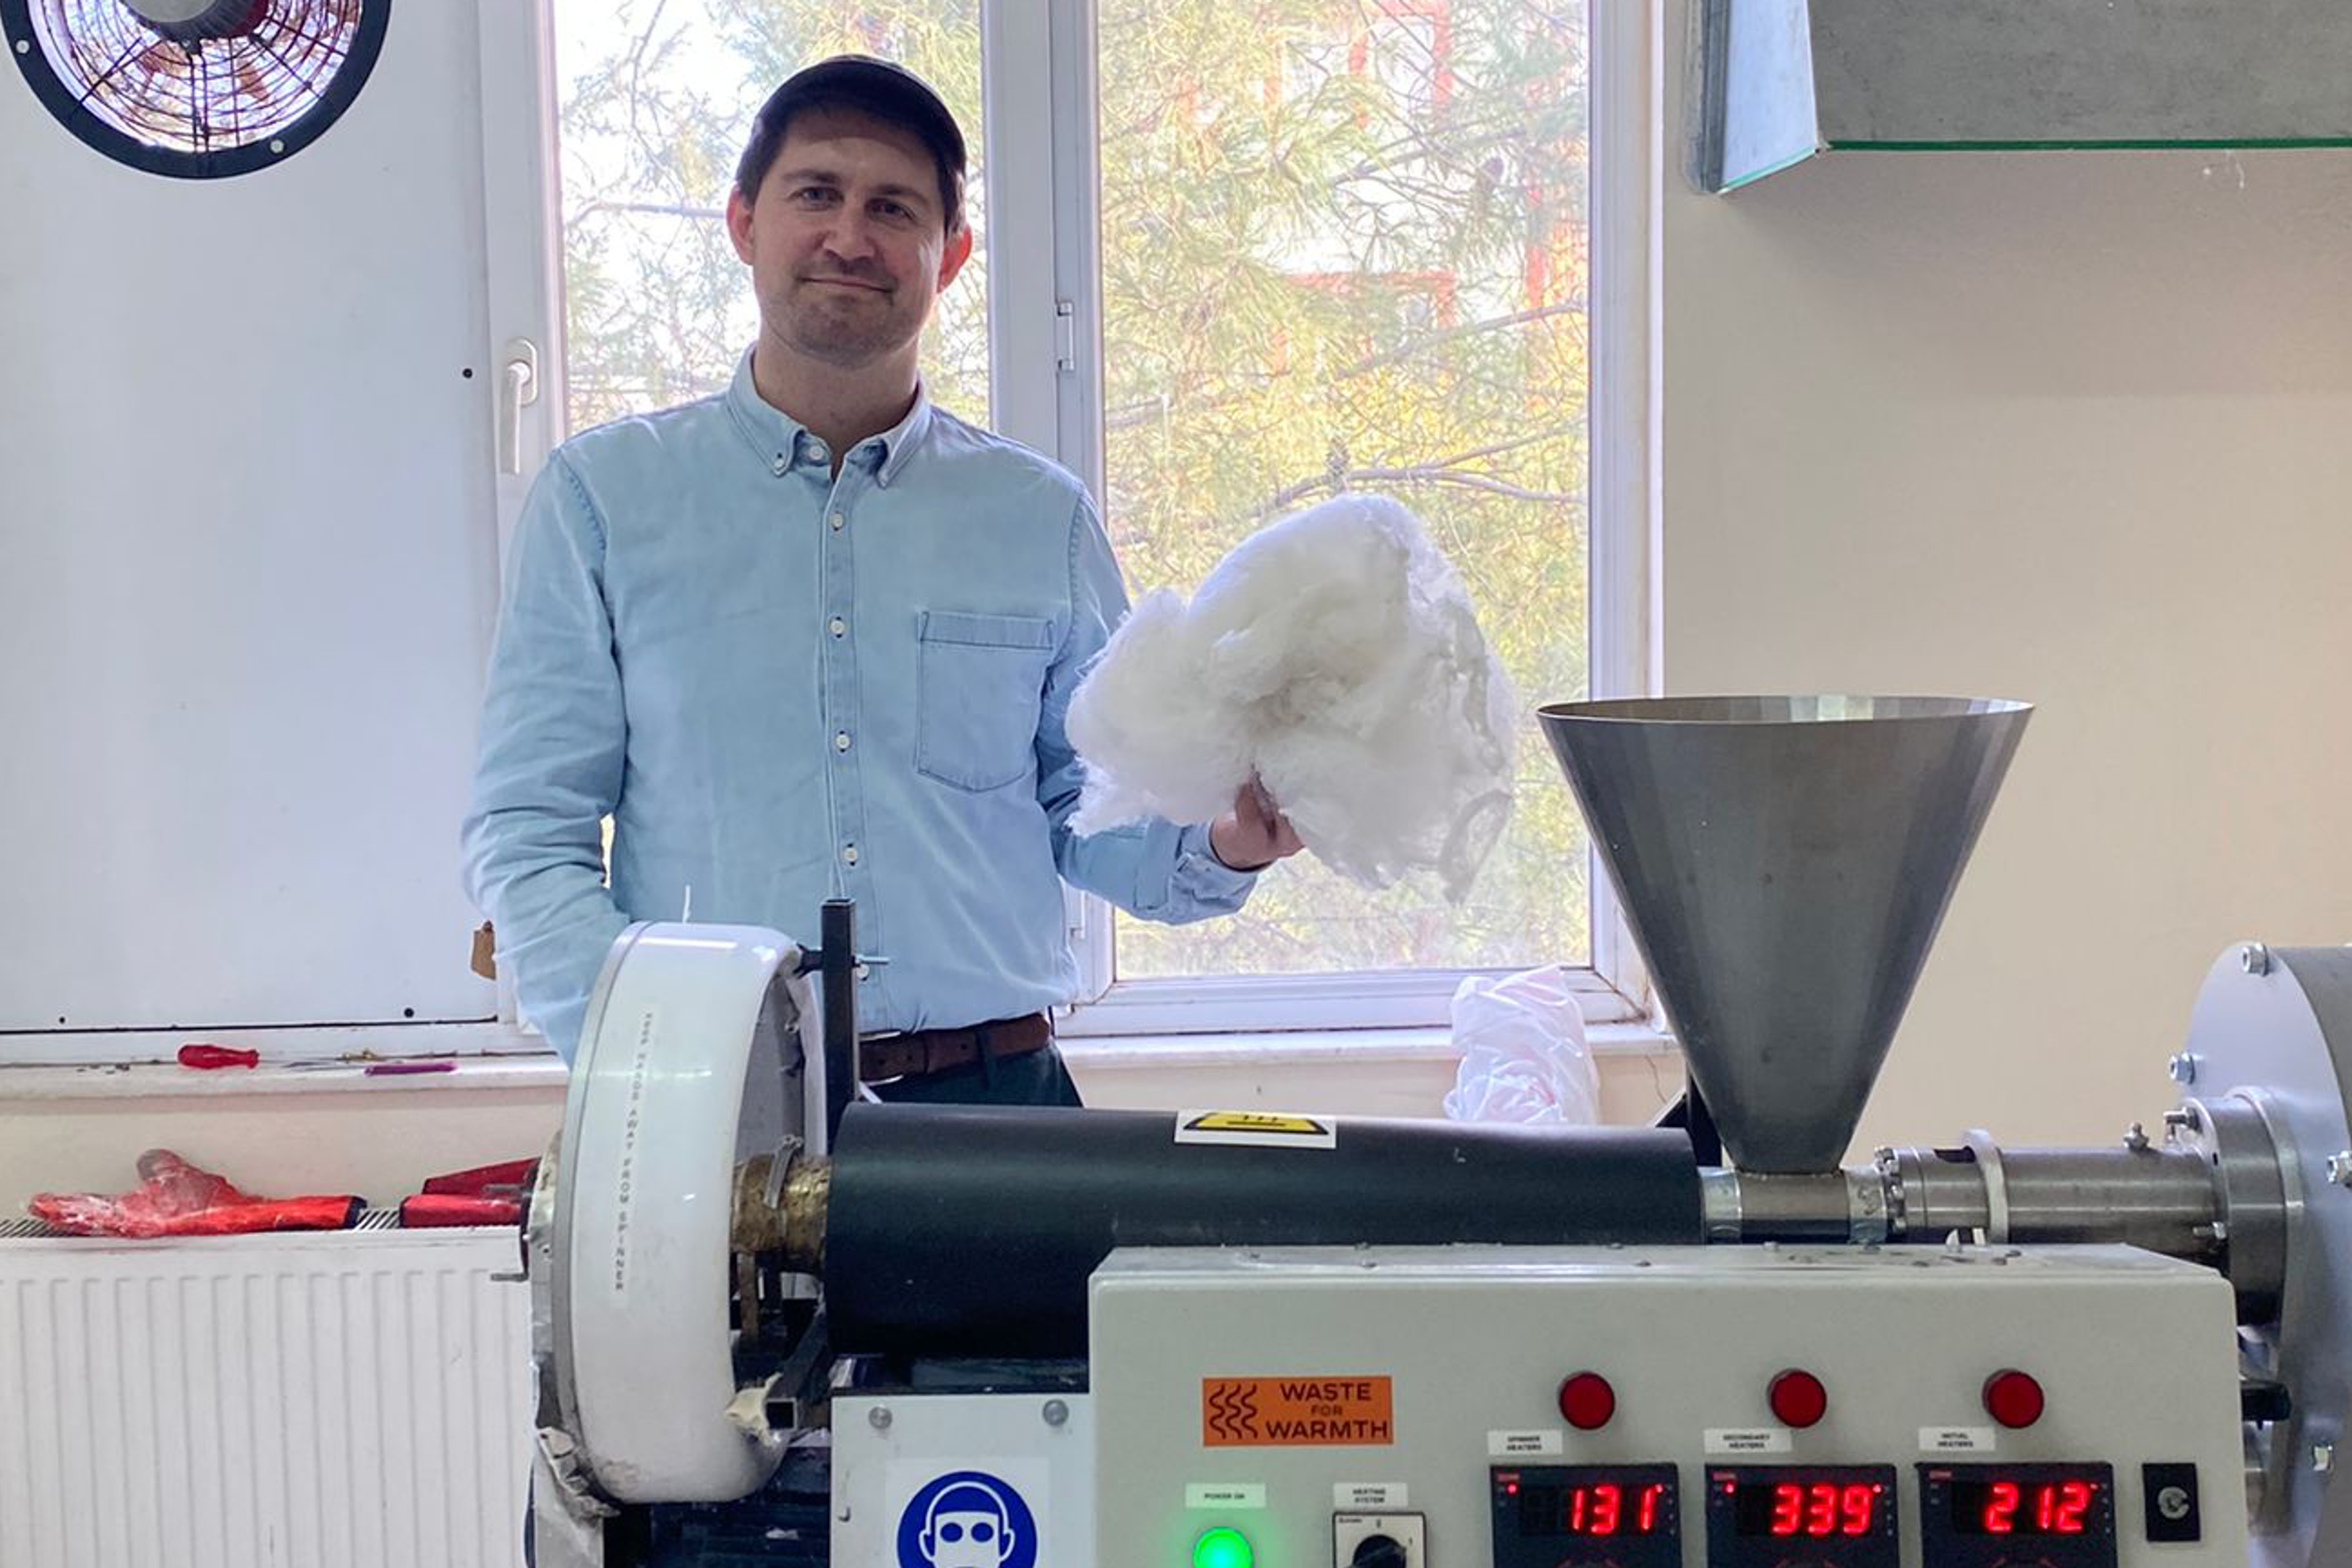 Egil Reksten is the project manager in the Waste for Warmth project led by Engineers Without Borders Norway. Here he is testing the Polyfloss machine that can make tent insulation from plastic waste.